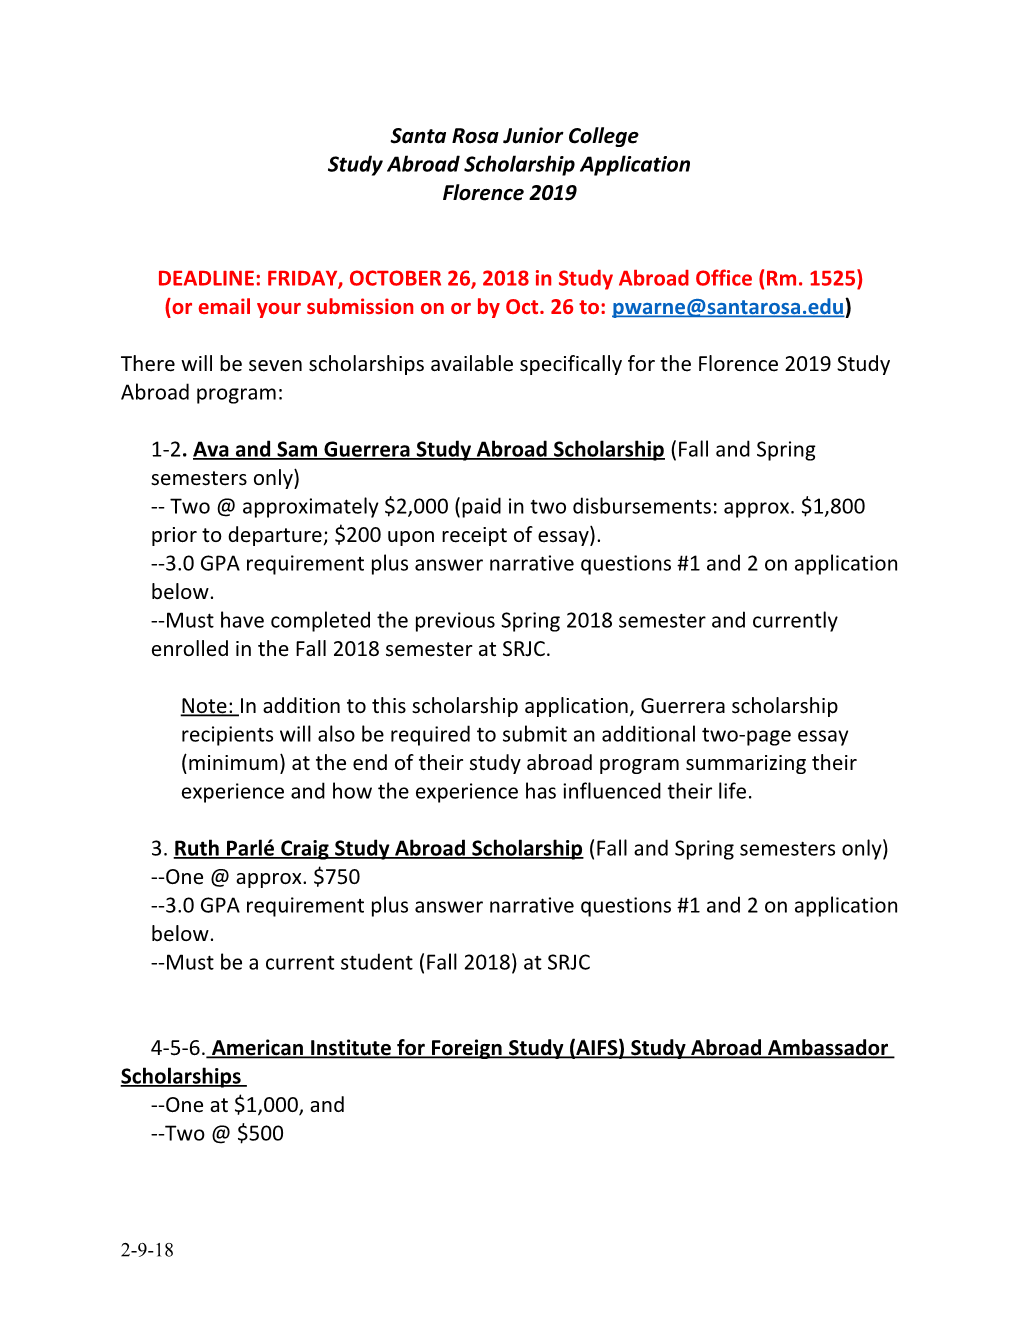 Study Abroad Scholarship Application